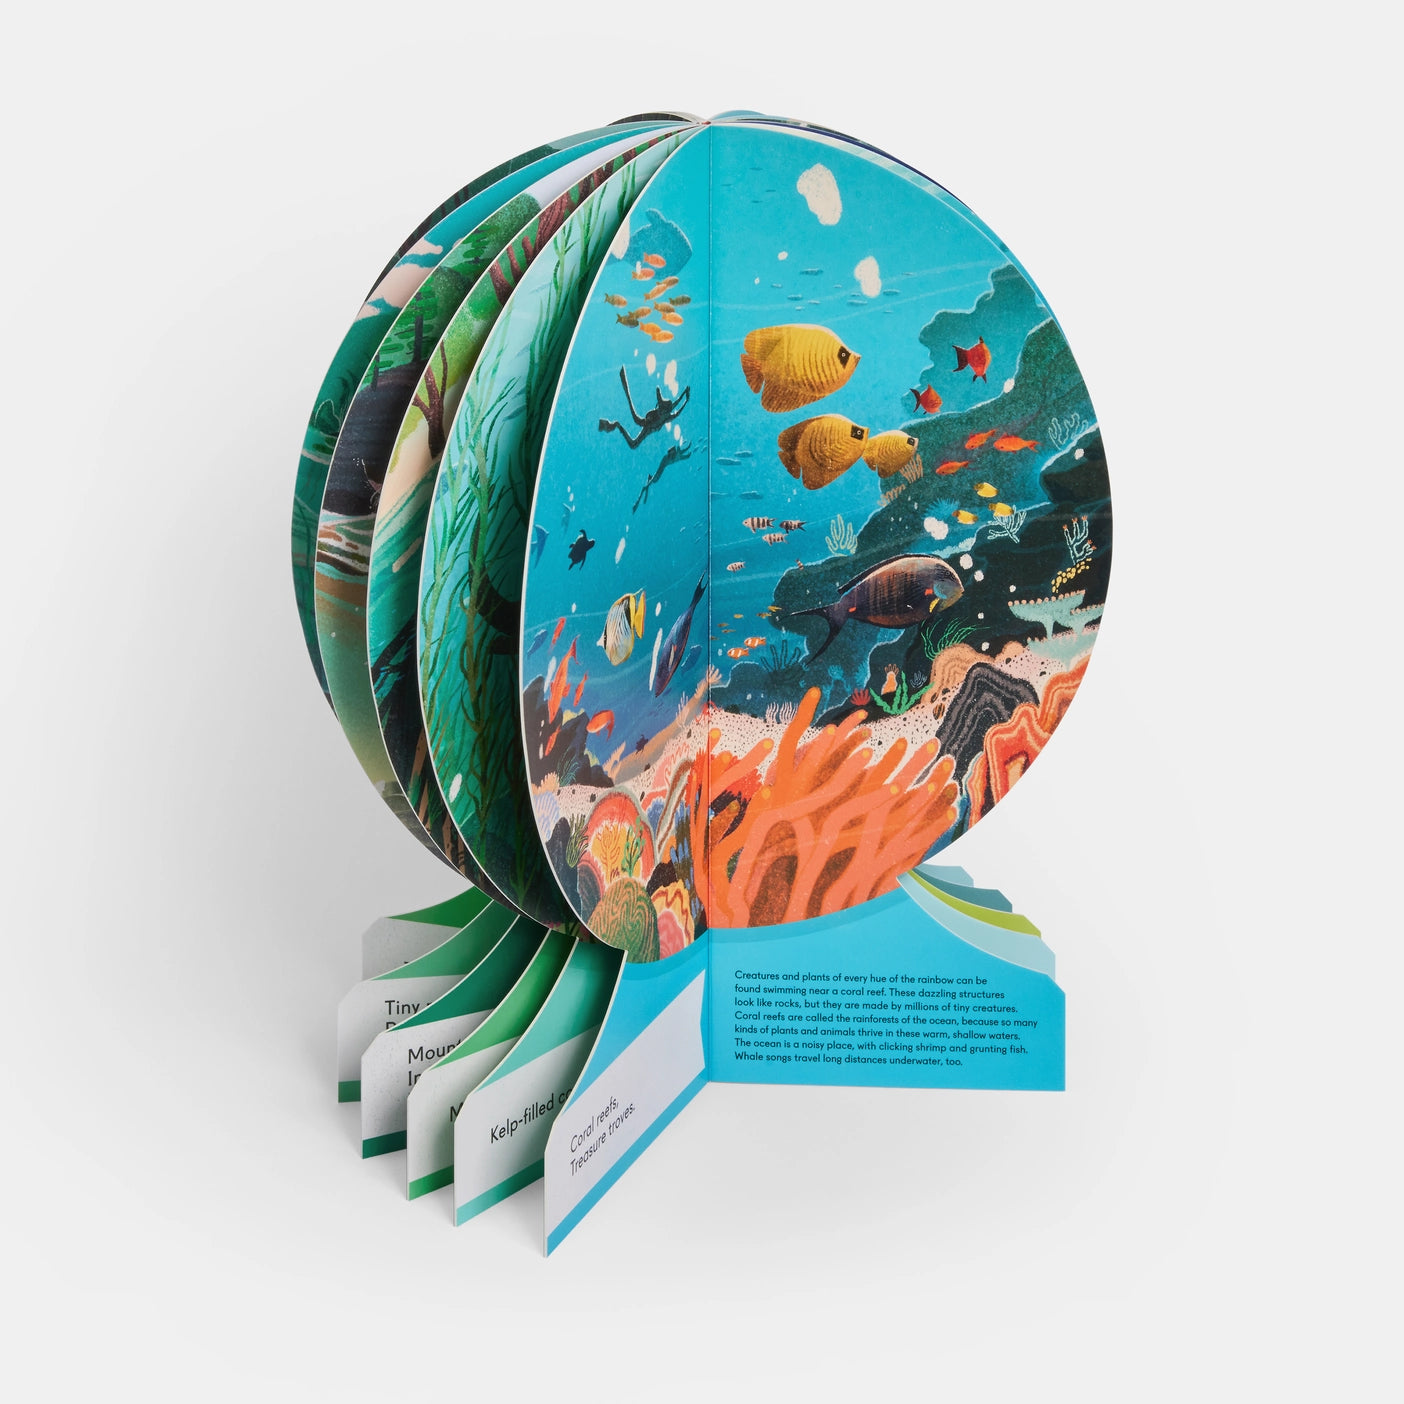 Nonesuch Books & More  Water Wow! - Under the Sea Water Reveal Pad